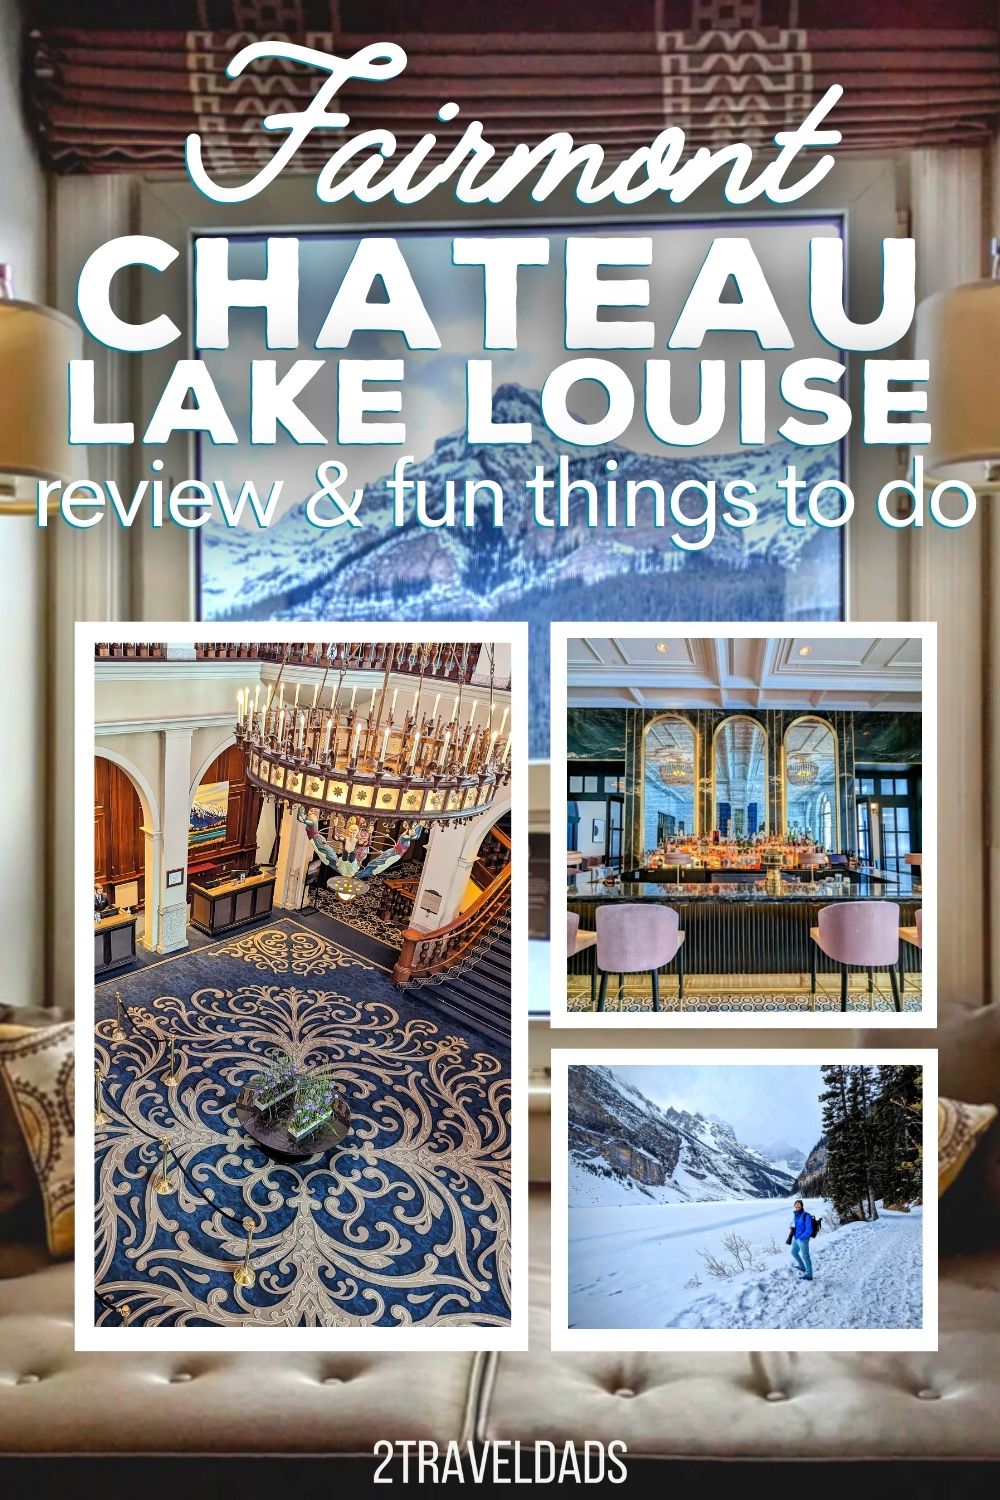 Staying at the Fairmont Chateau Lake Louise is a bucket list travel experience for many. See all the details about rooms, restaurants, amenities and things to do at the Chateau Lake Louise. This is a complete review of staying at the Chateau, including Fairmont Gold information.